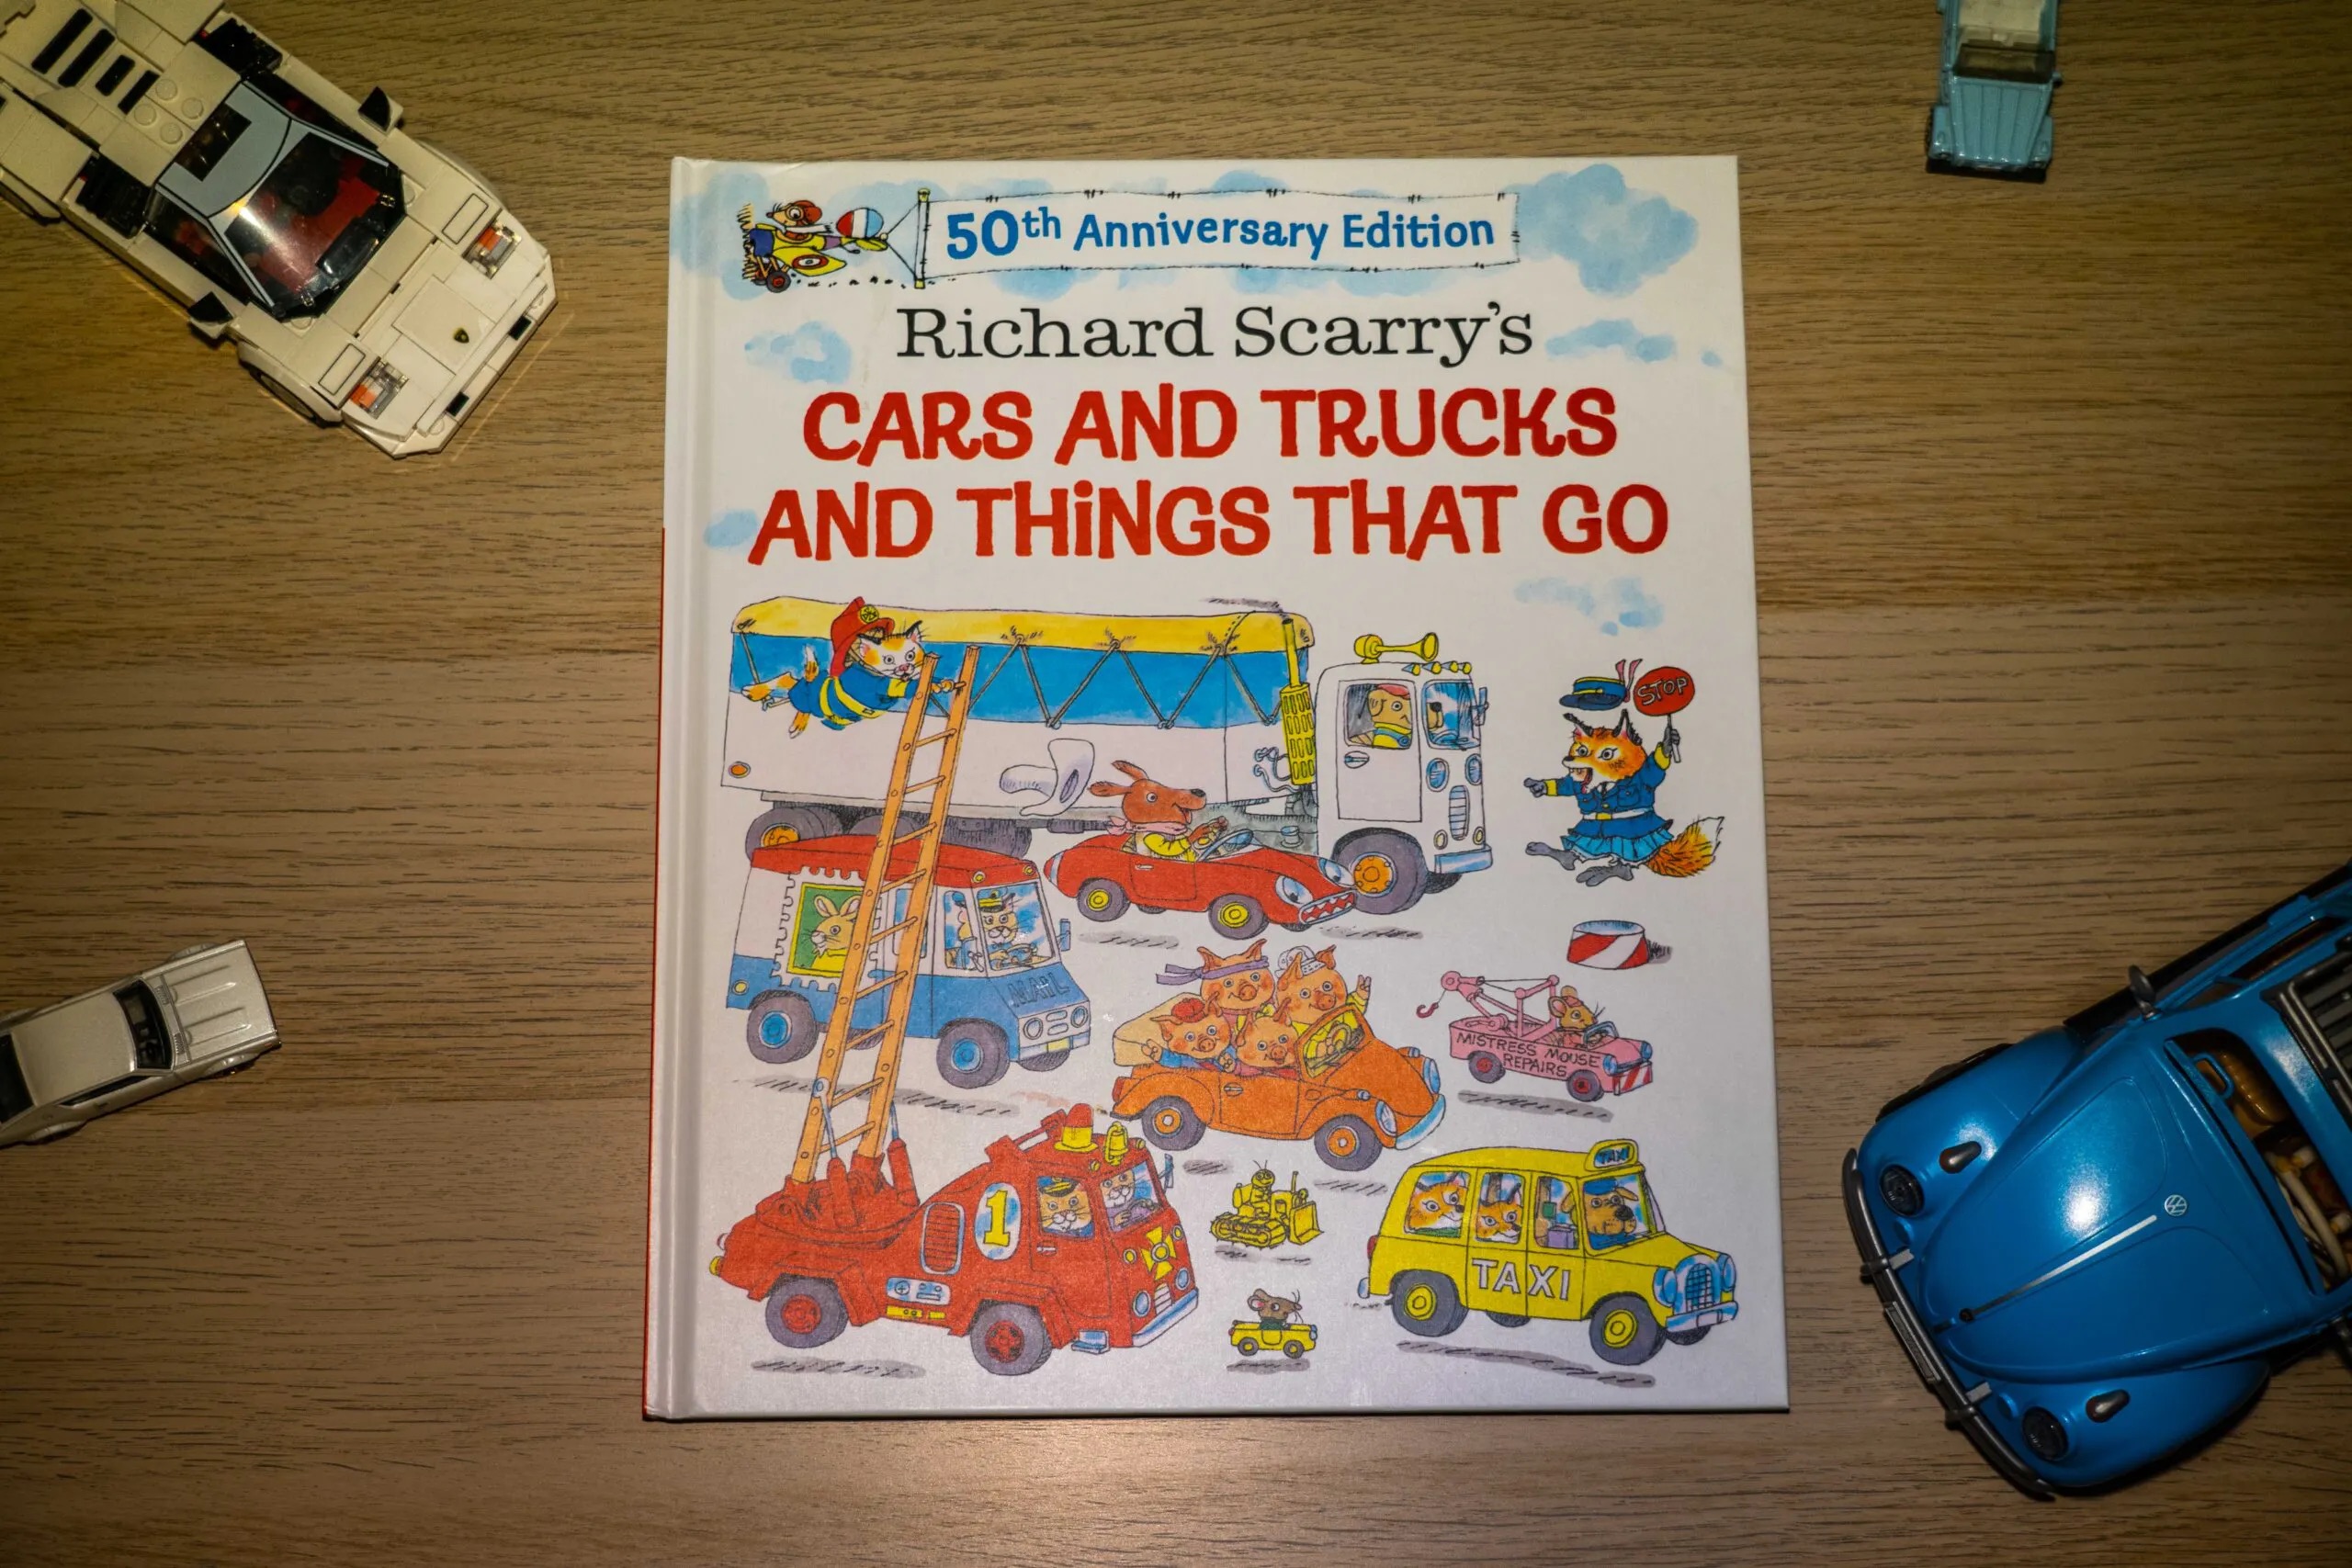 Richard Scarry’s Beloved Classic 